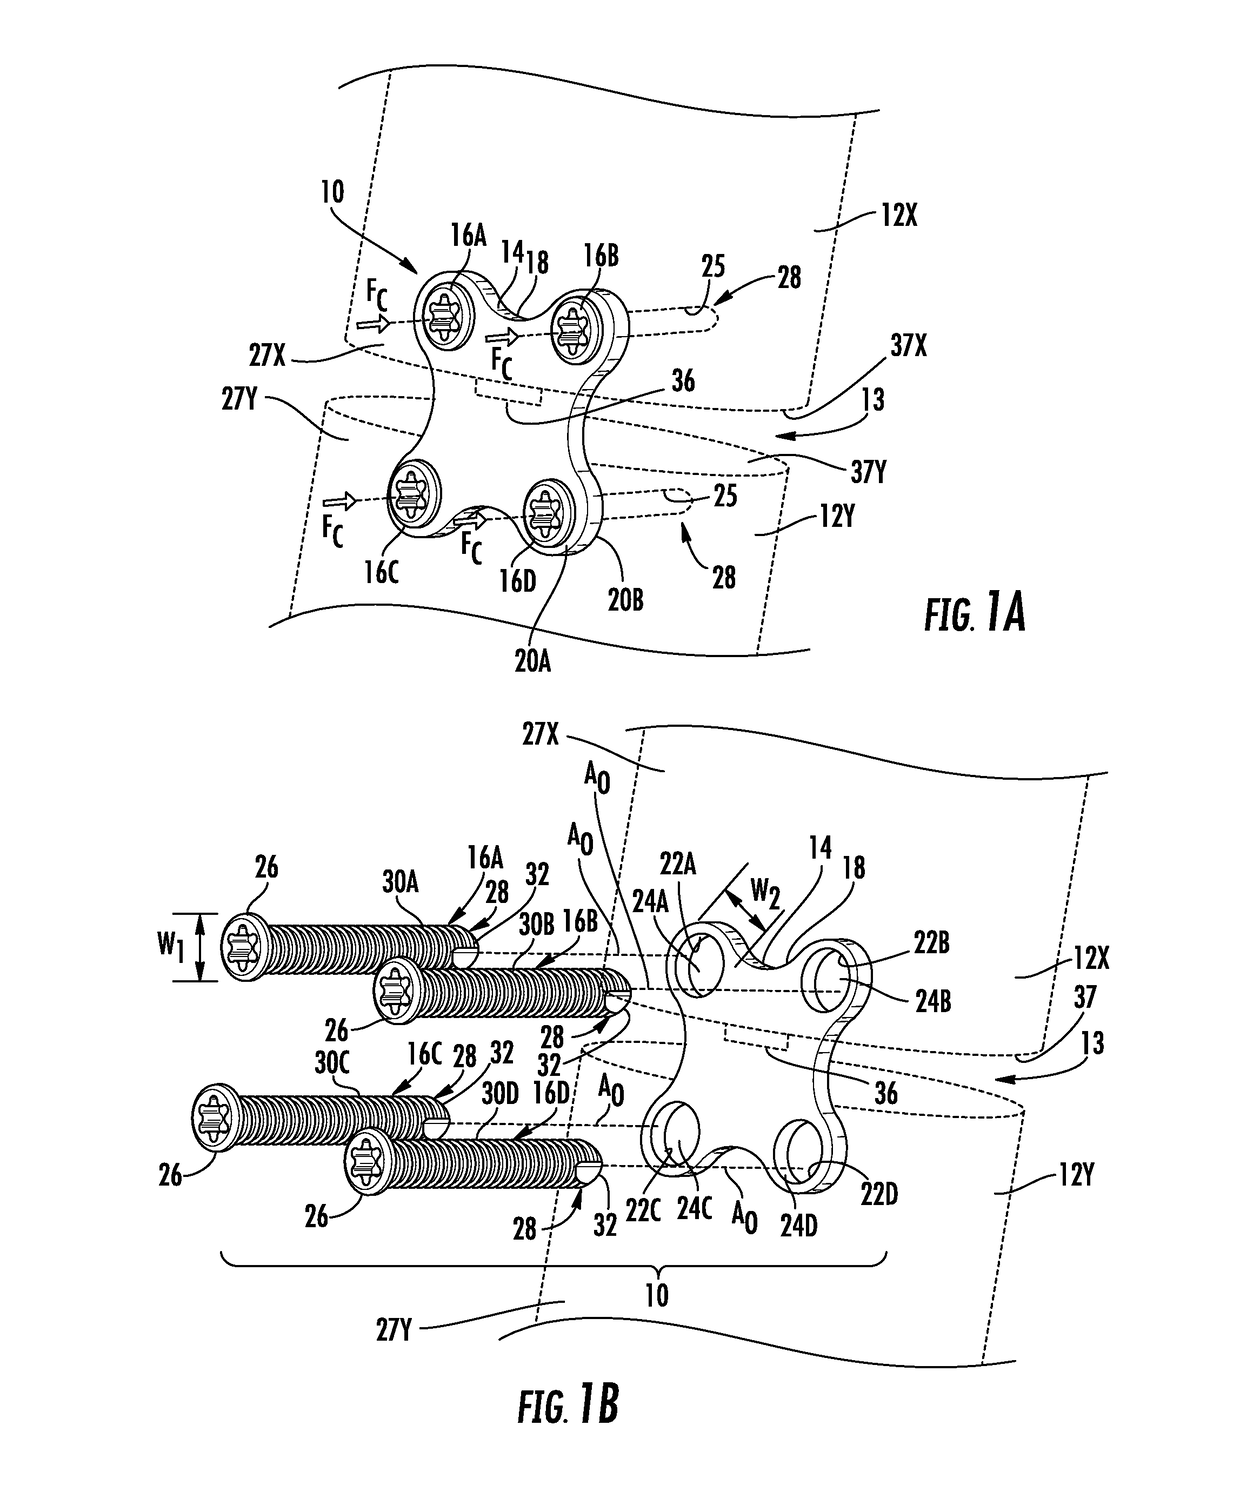 Anterior cervical plates for spinal surgery employing anchor backout prevention devices, and related systems and methods